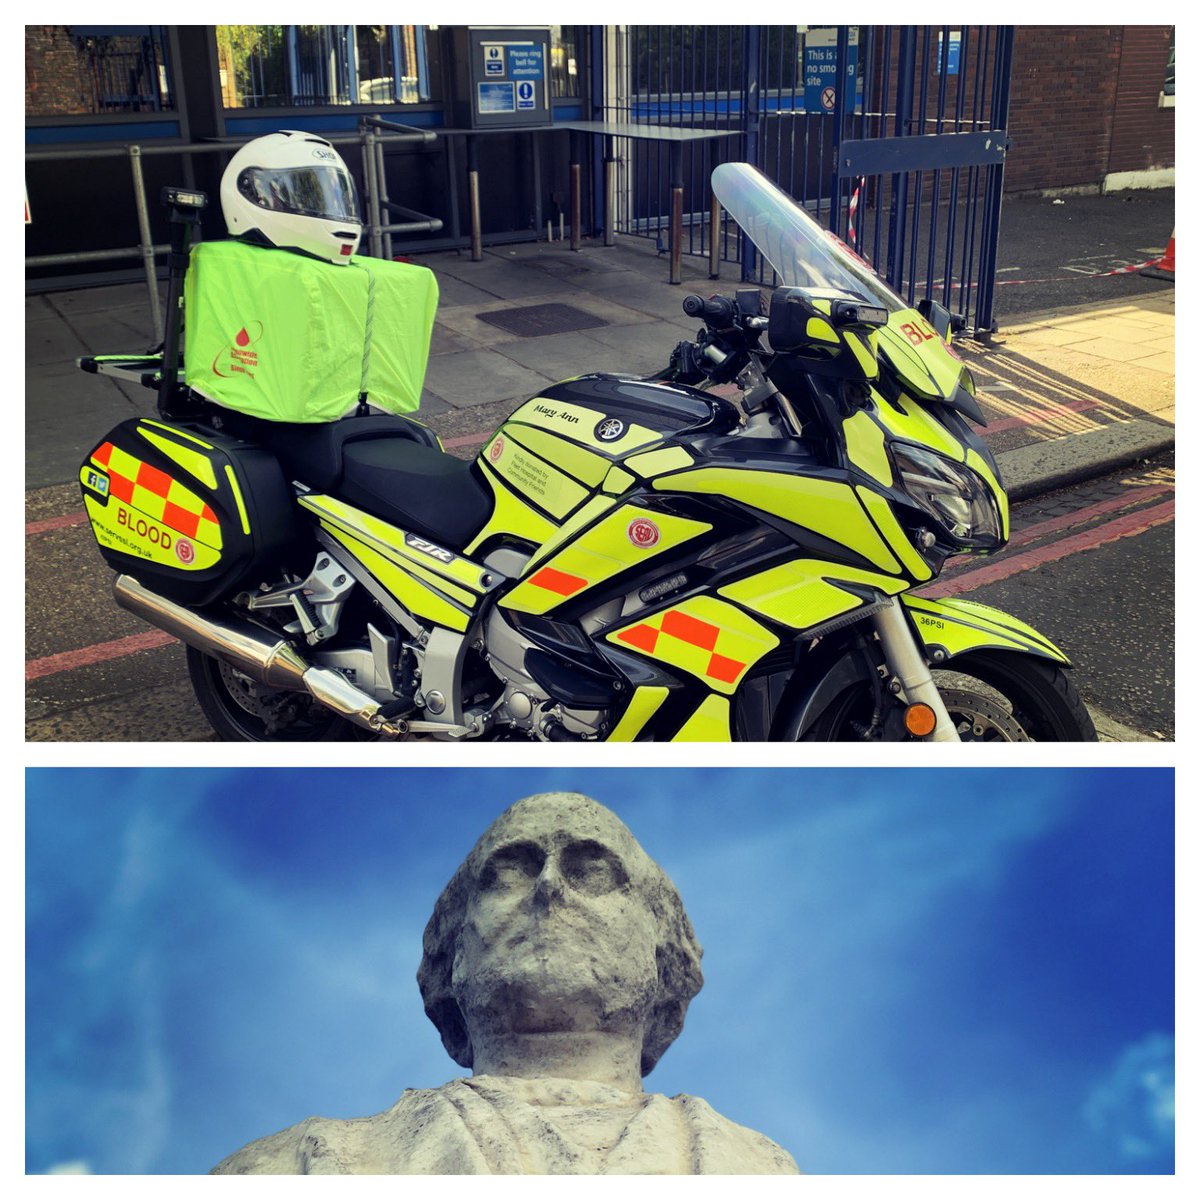 Mary Ann having a busy day... but where abouts was her destination this time? This chap might give you a clue

#servssl #ItsWhatWeDo #bloodbikes #bloodcars #bloodrunners #london #fjr1300 #volunteers #nhs #team999